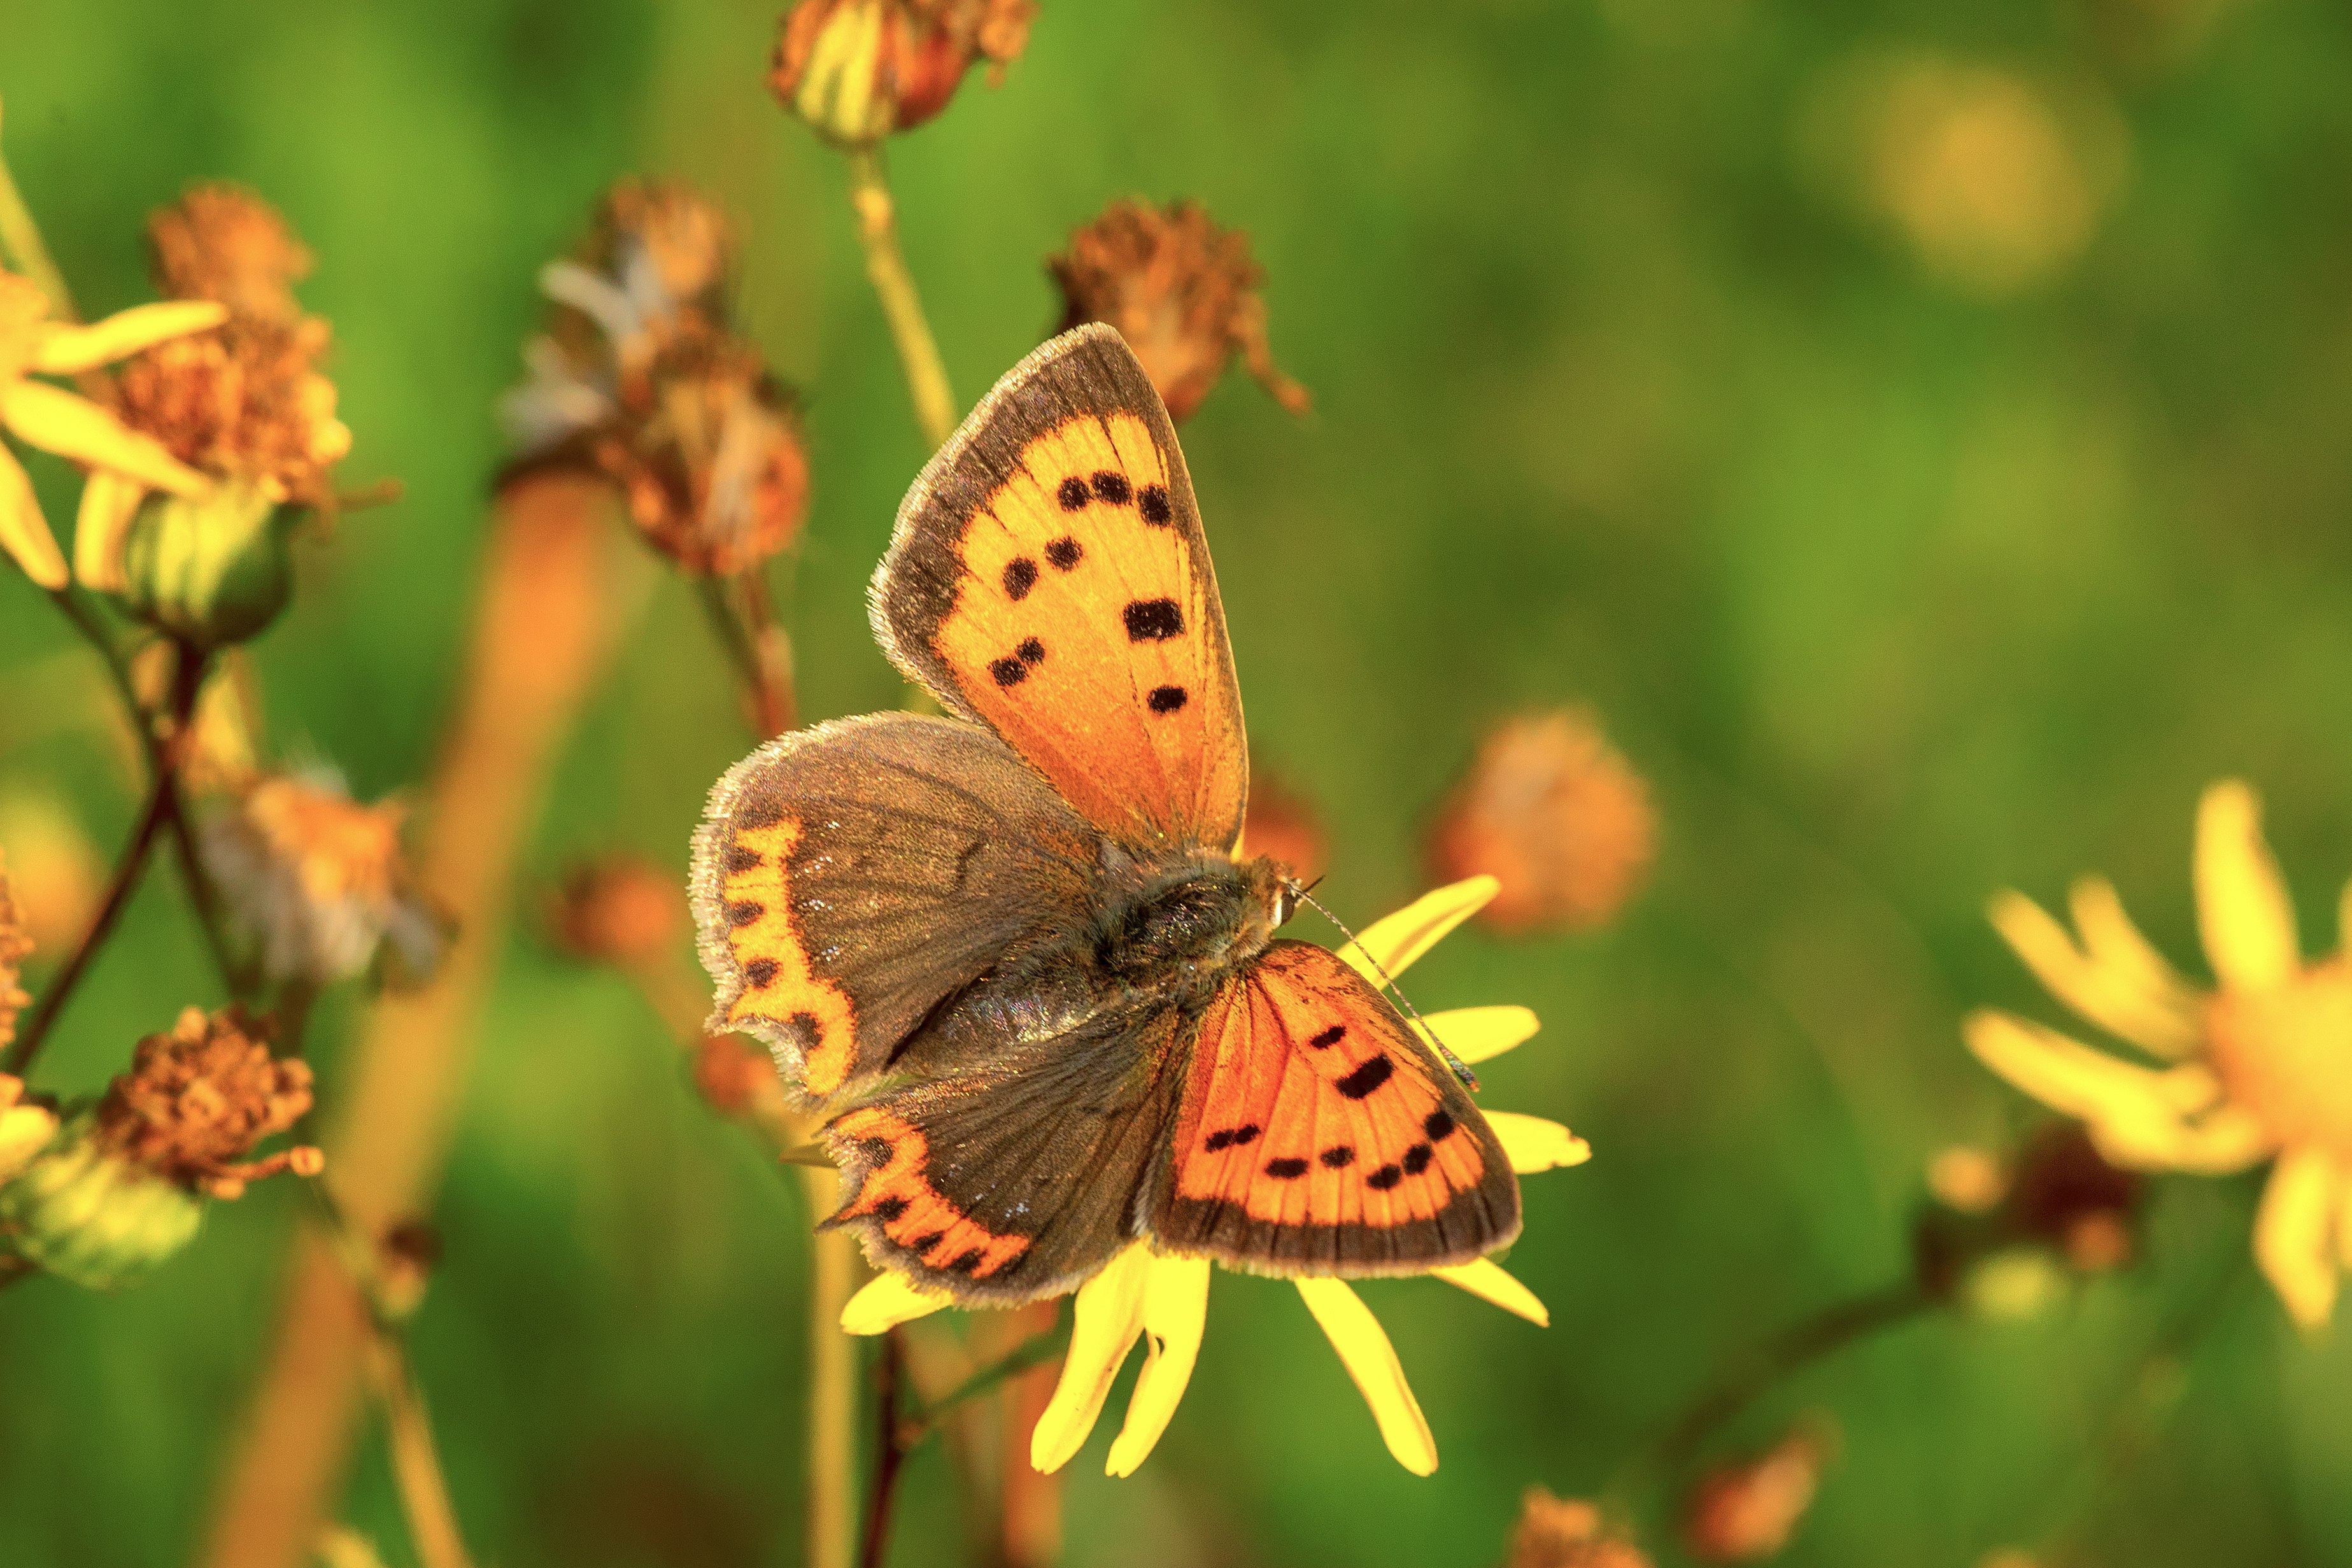 brown and black butterfly perched on yellow flower